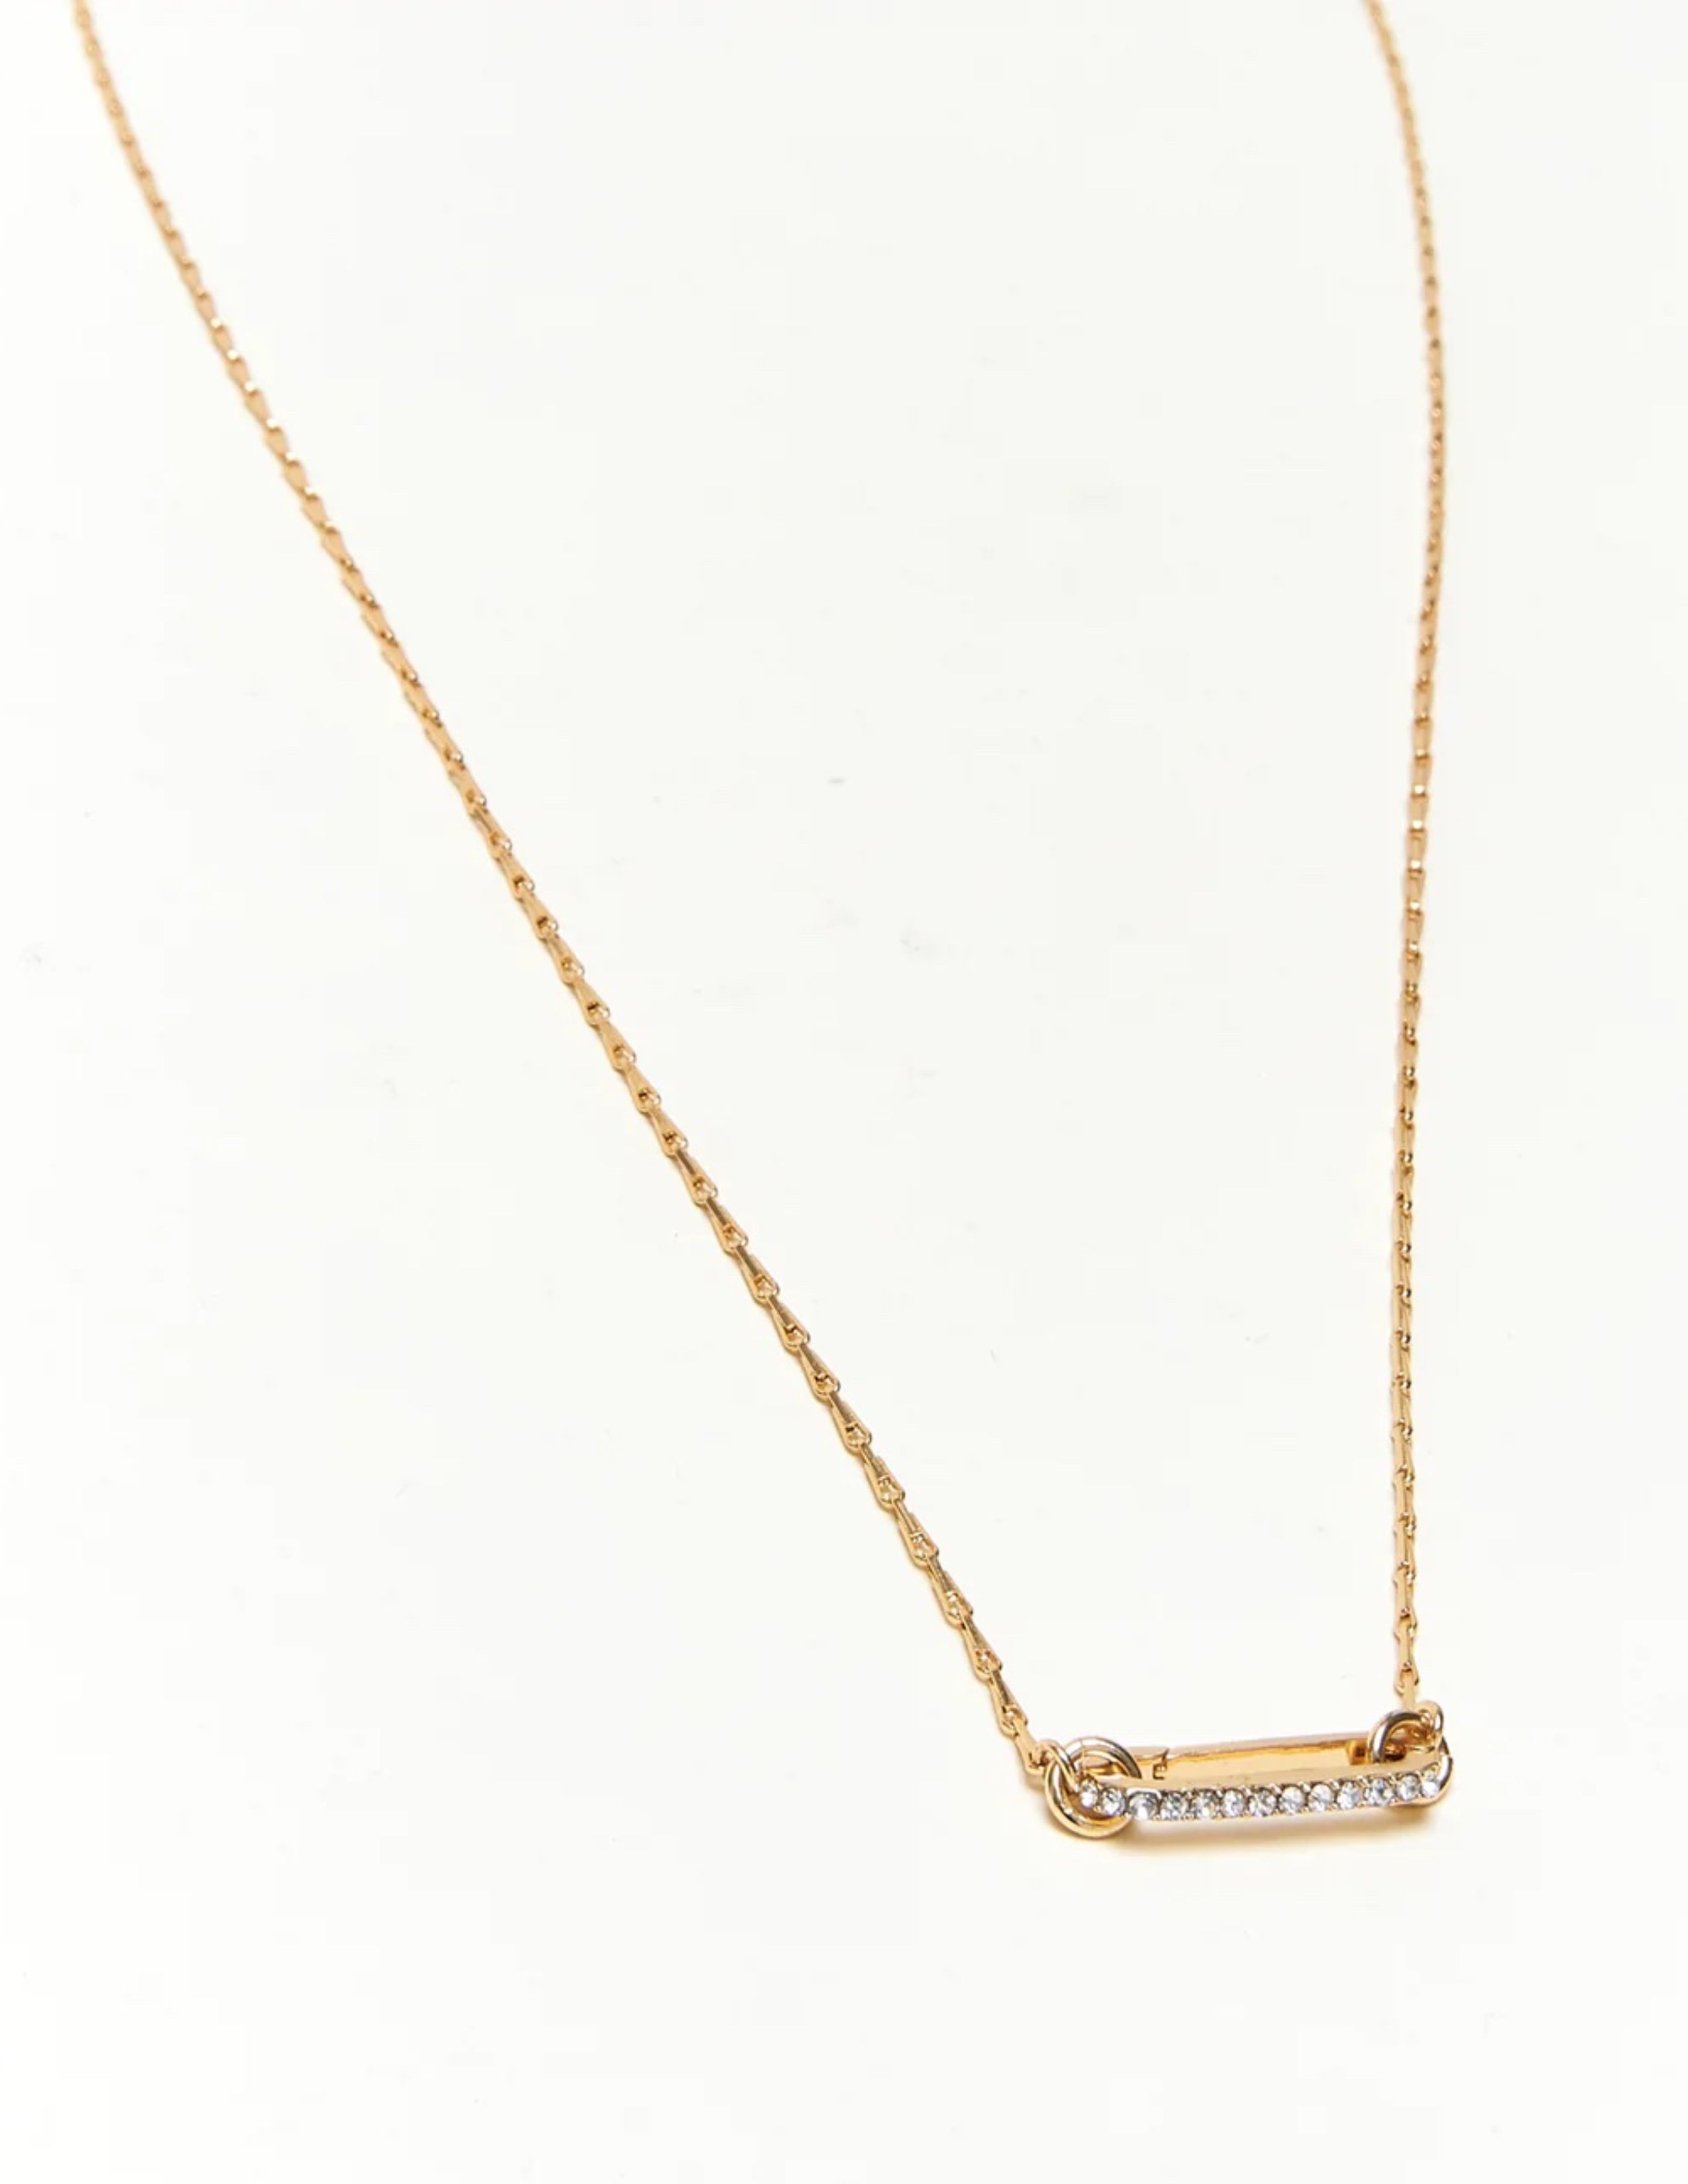 Lucy Lux Necklace